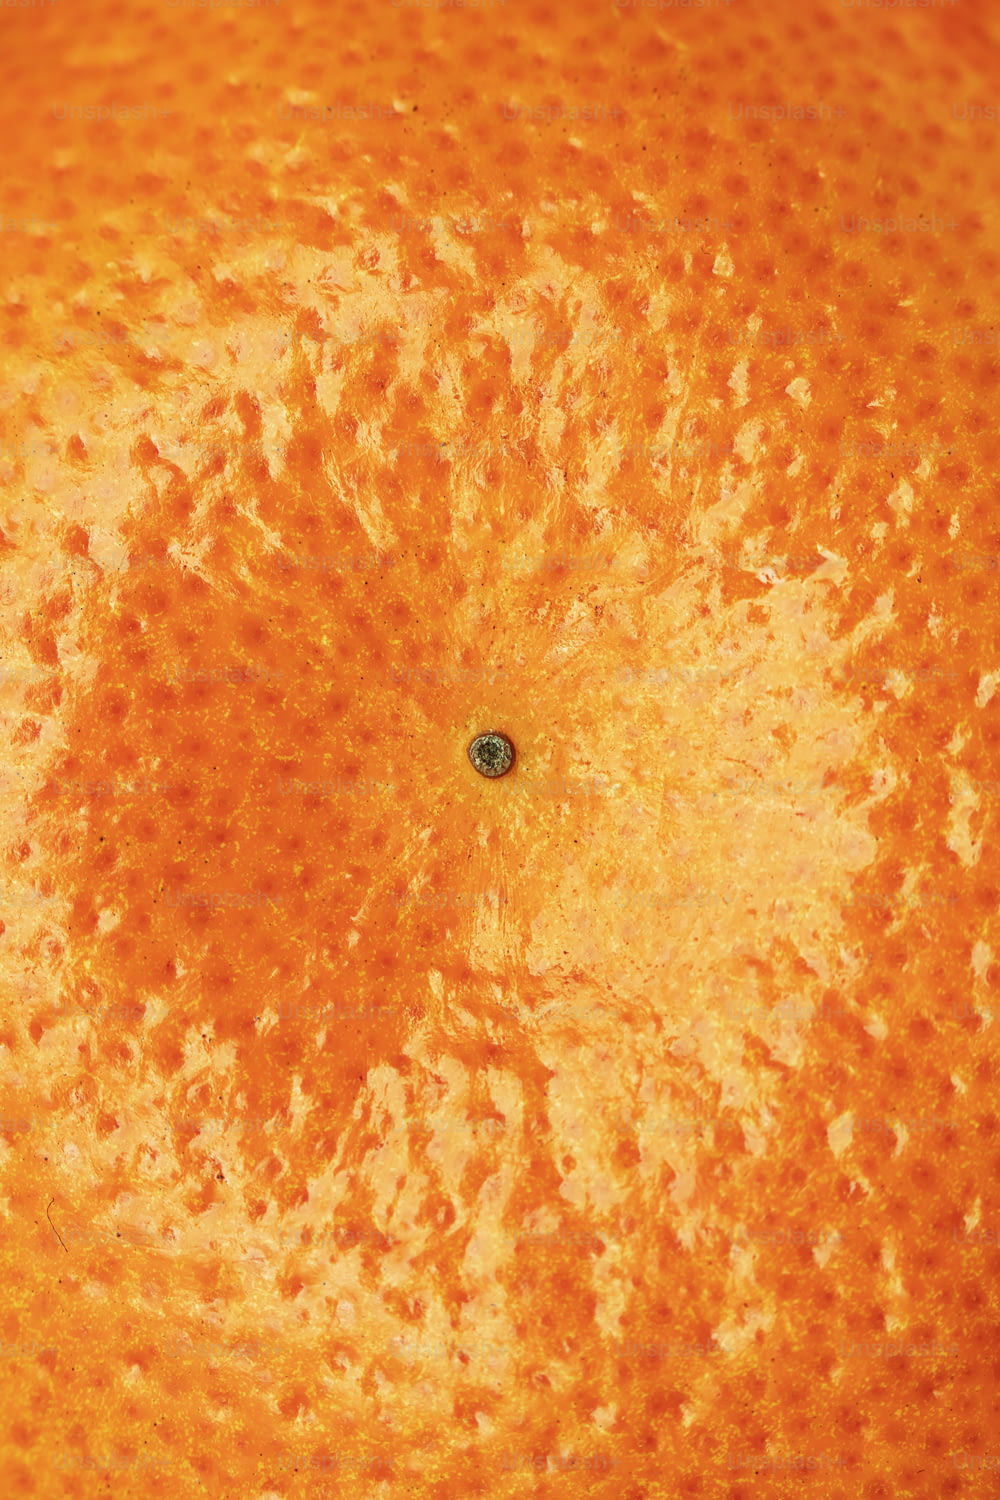 a close up of an orange with a black spot in the center